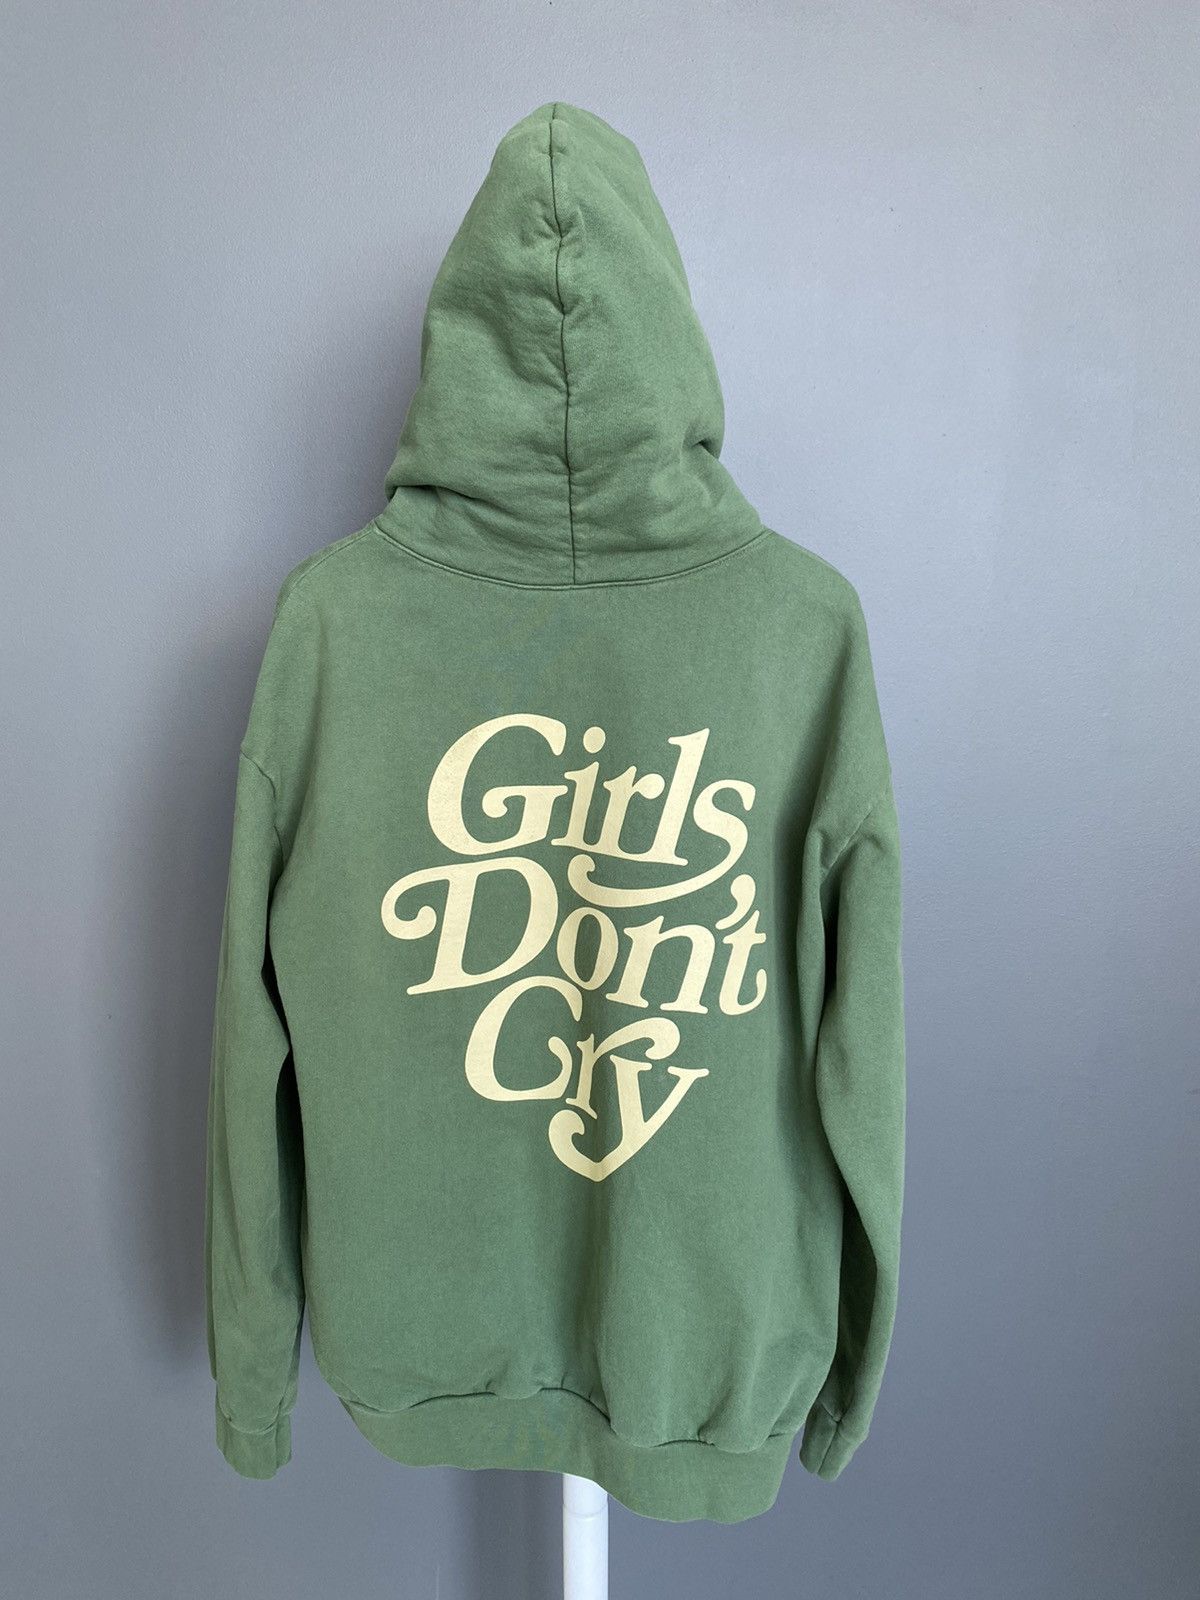 Girls Dont Cry Girls Don't Cry Forest Green Hoodie Size L | Grailed